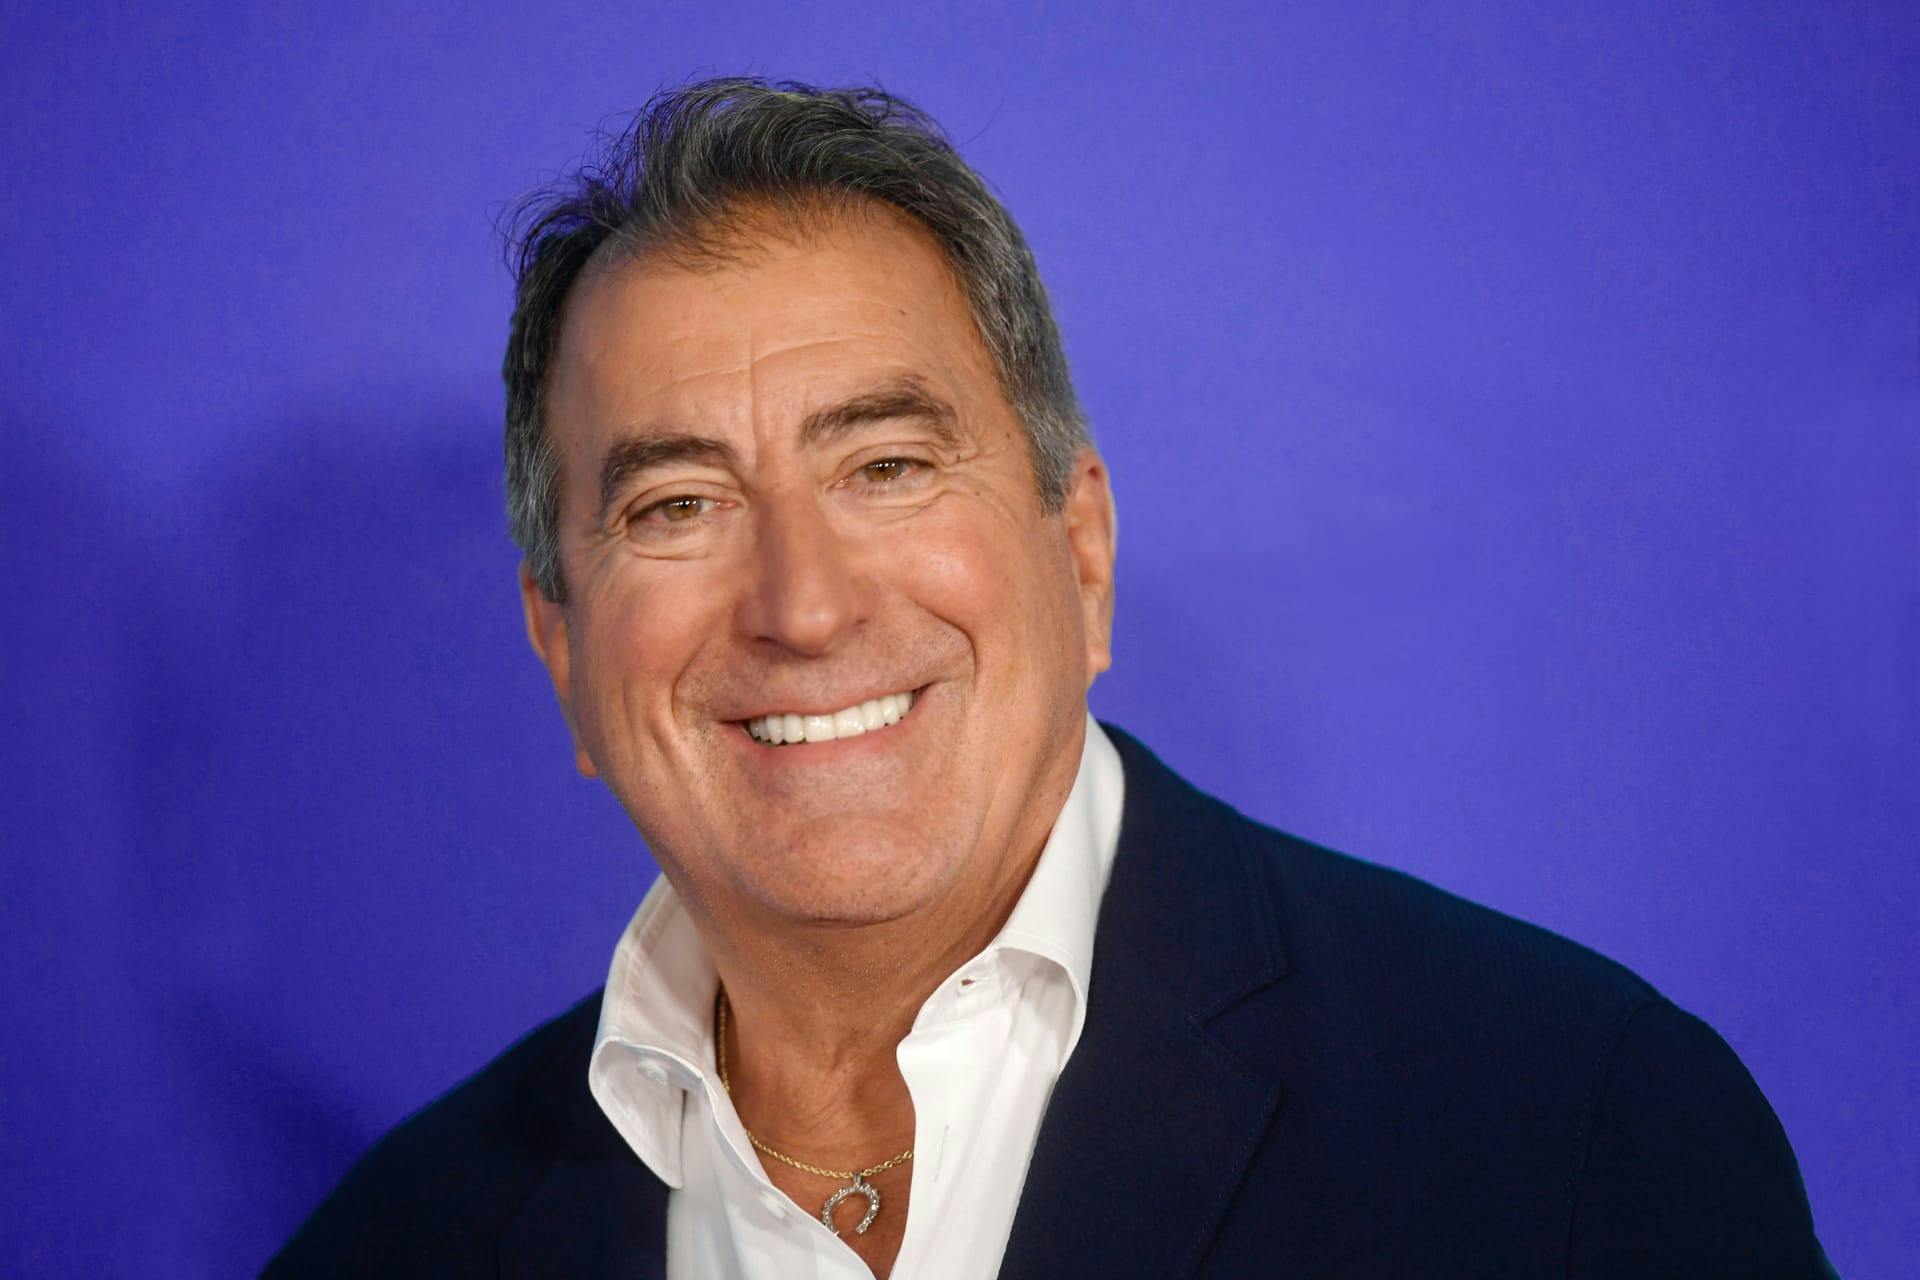 Kenny Ortega wears a navy jacket and white shirt.